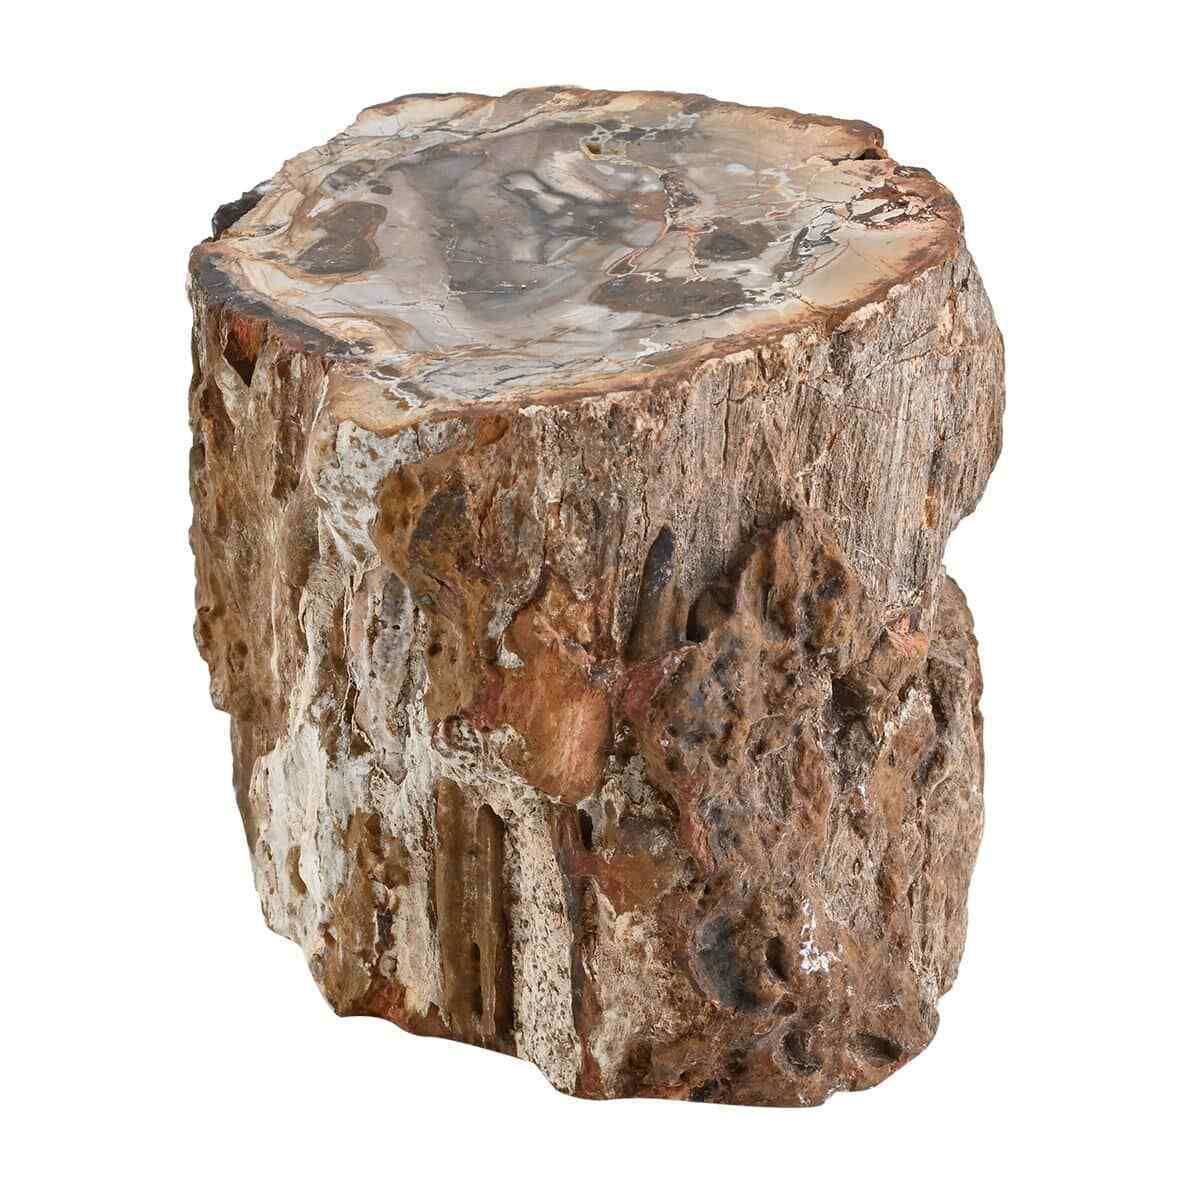 Petrified Wood Branches Home Indoor Outdoor Decoration -S Approx. Ct 5216 Gifts